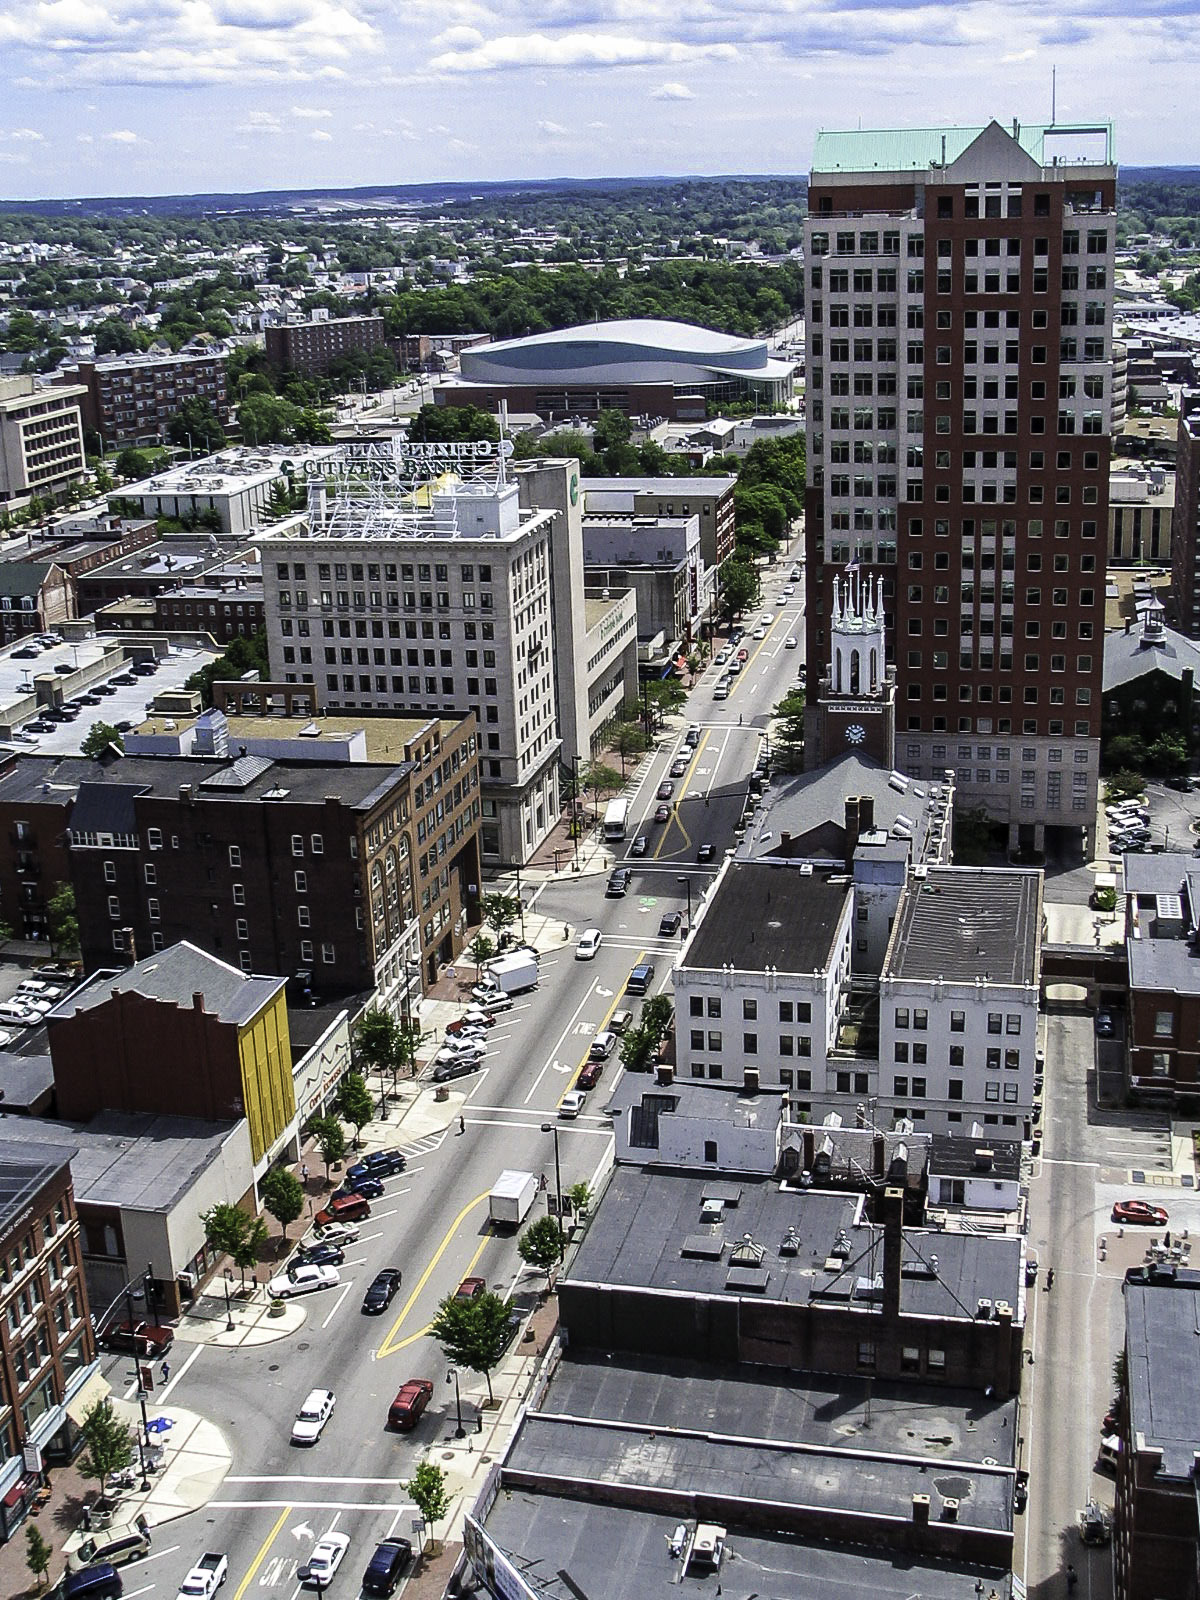 Downtown Buildings and Cityscape in Manchester, New Hampshire image